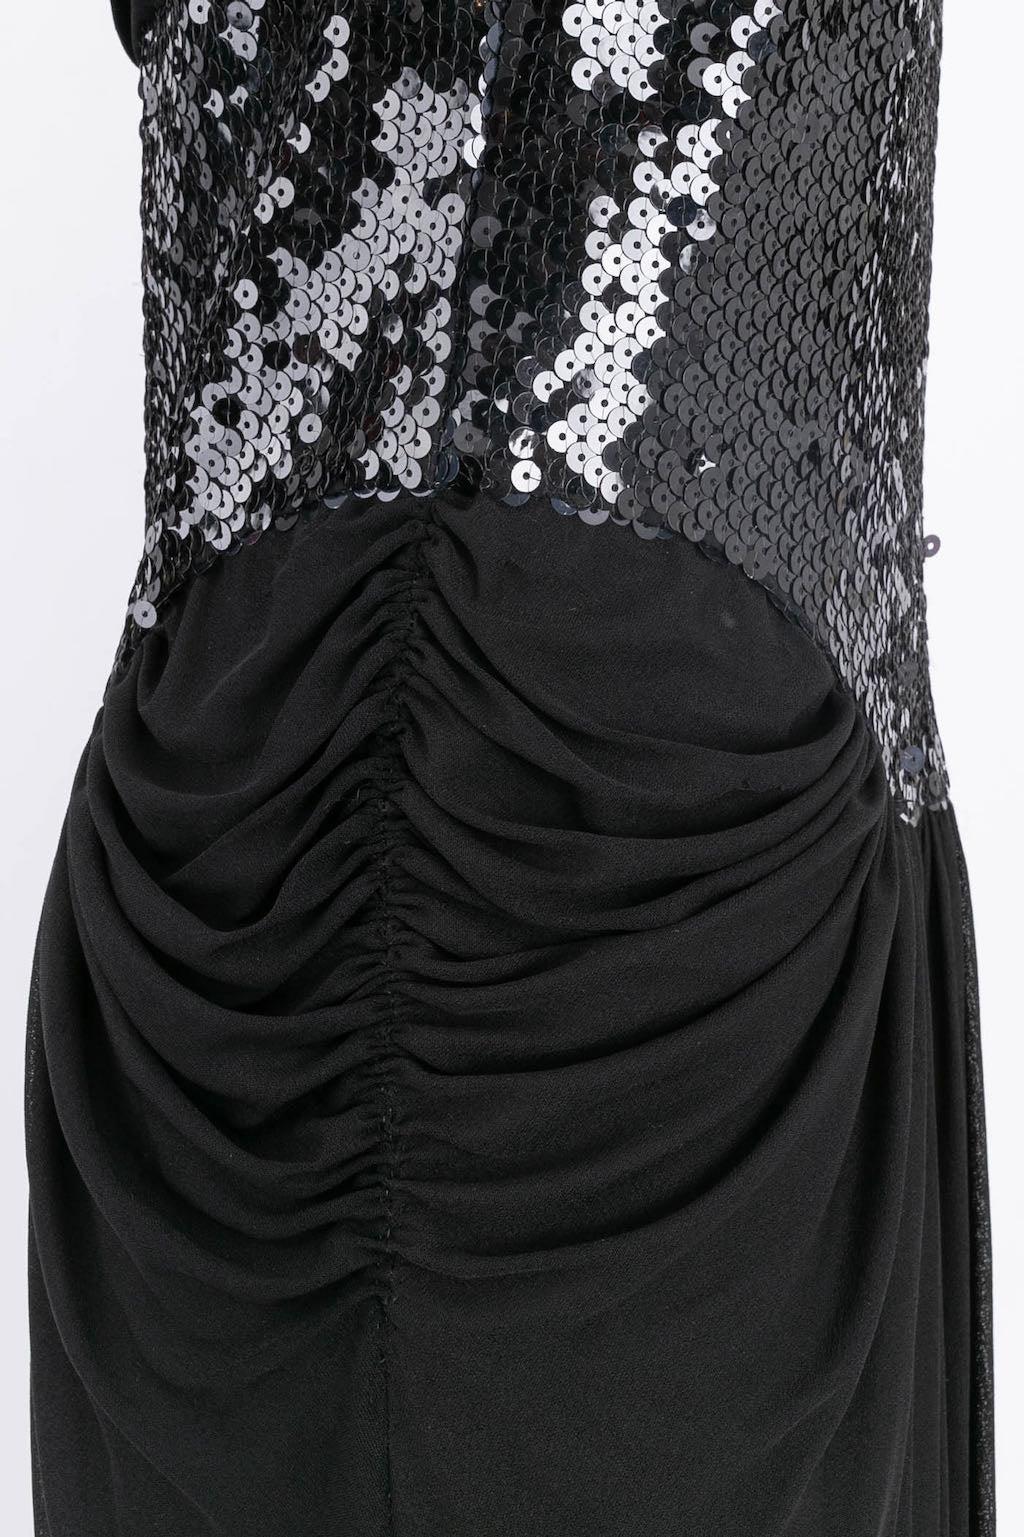 Azzaro Black Sequined Dress, Size 36FR For Sale 4